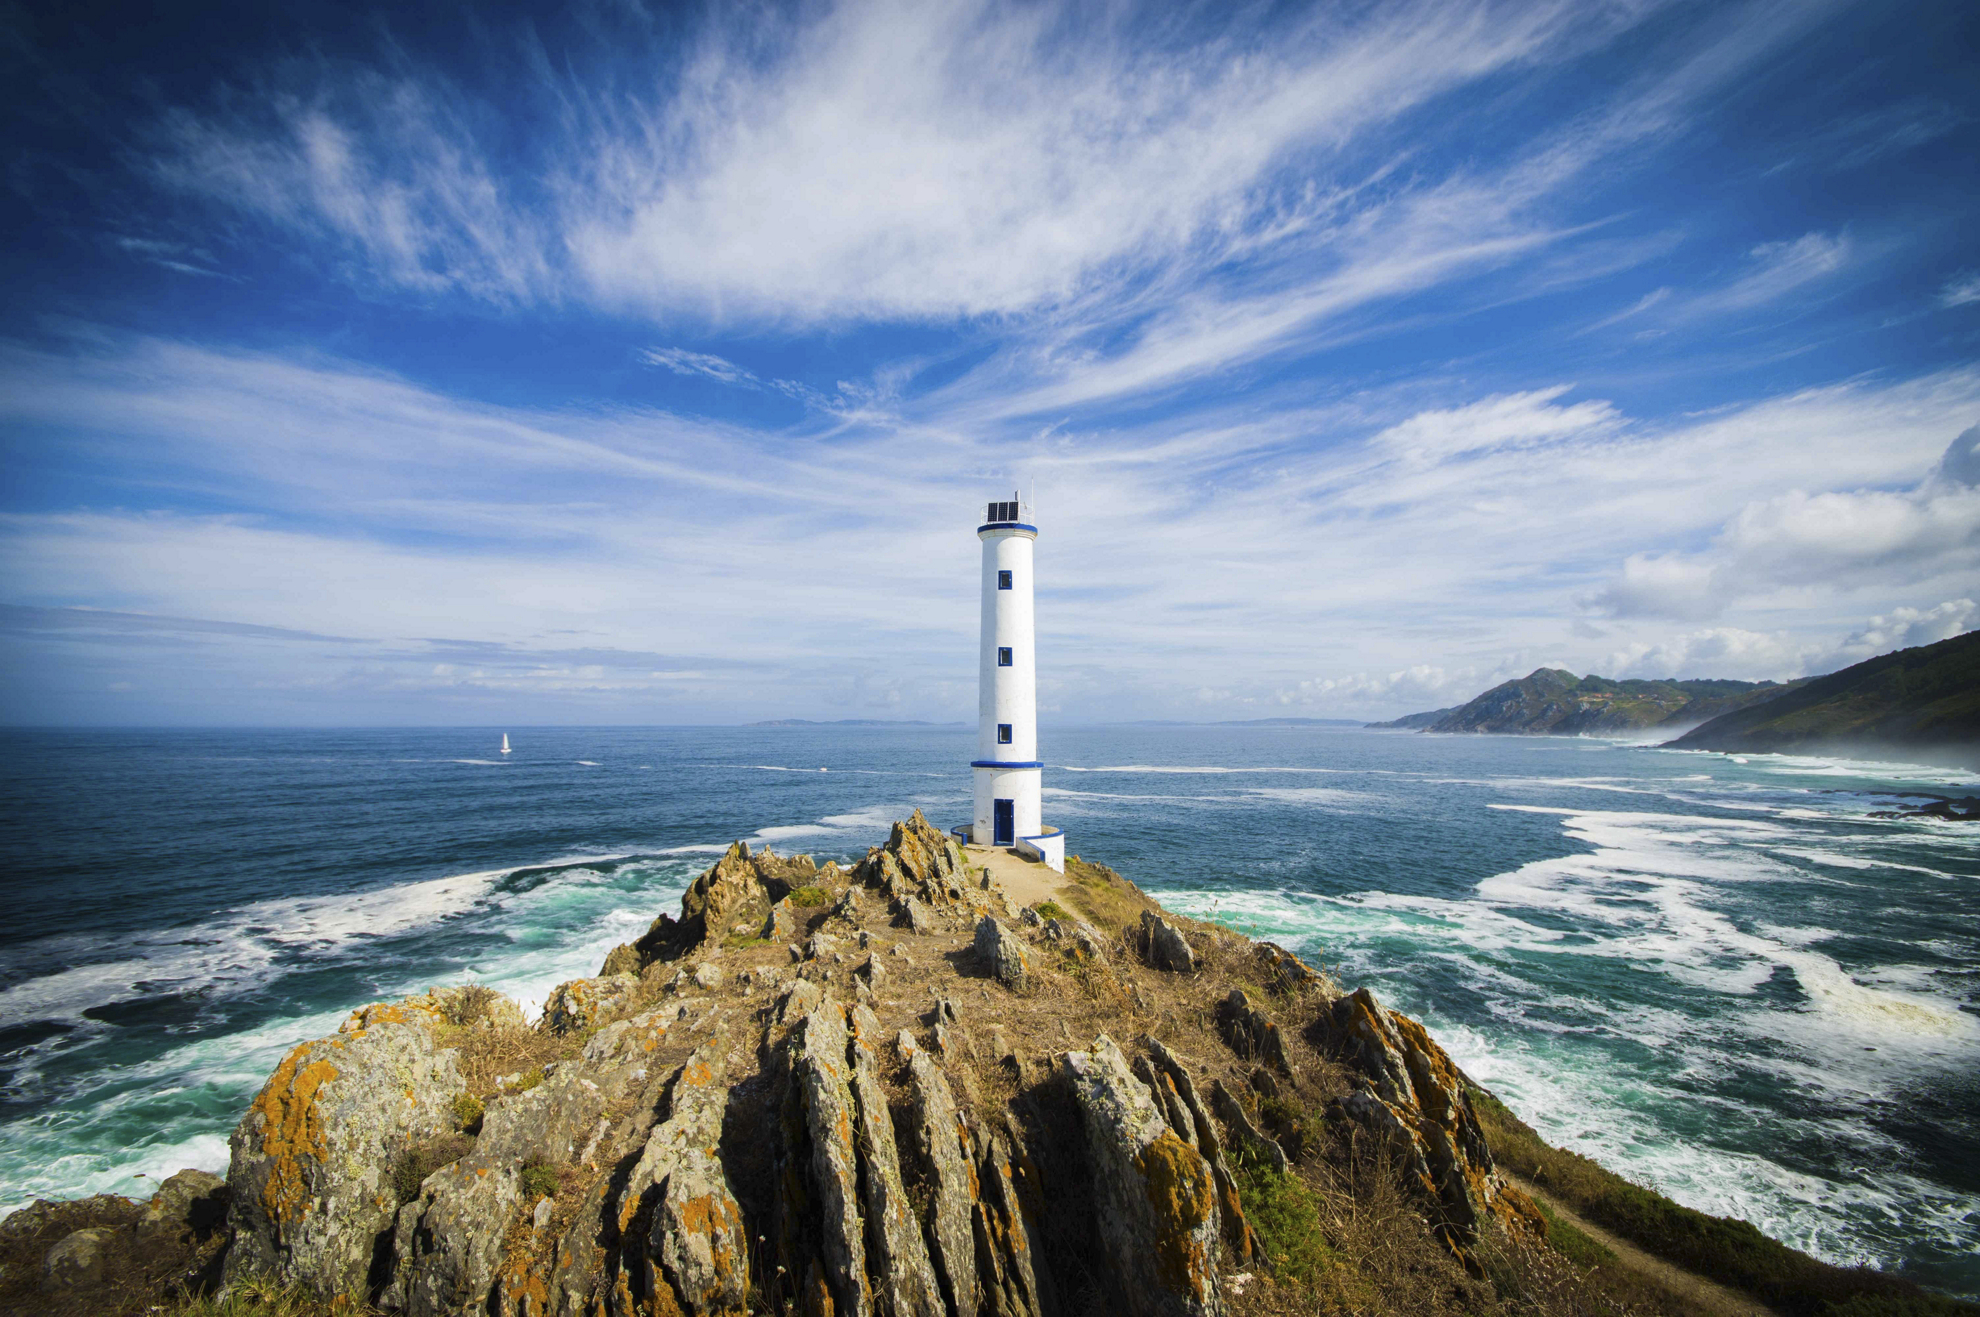 Holidays in Galicia: The lighthouse of Cangas de Morrazo surrounded by sea